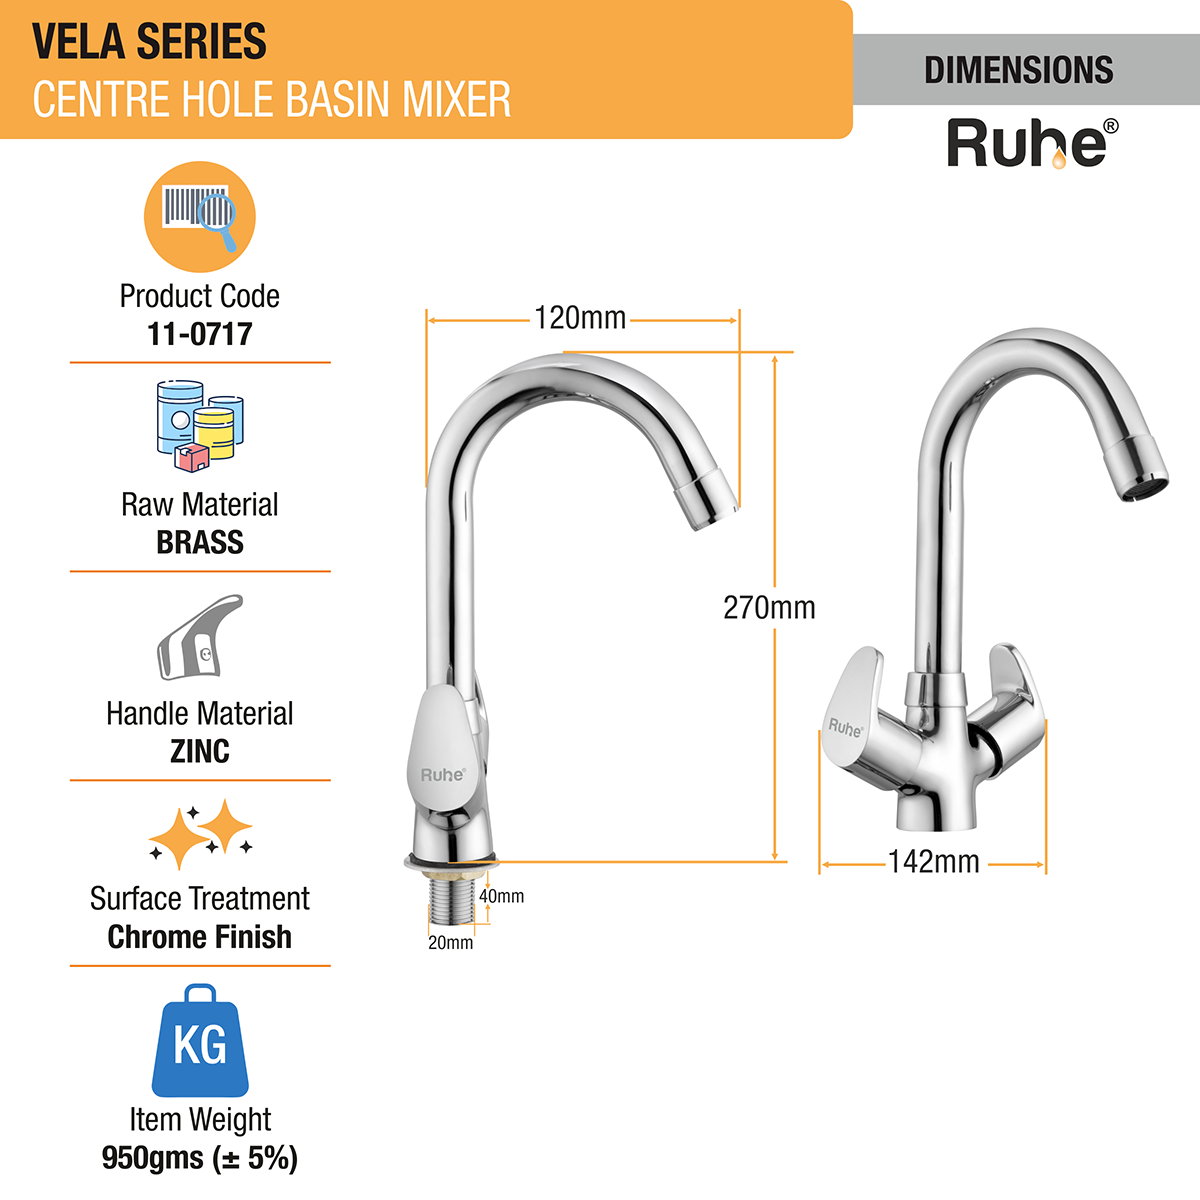 Vela Centre Hole Basin Mixer with Small (12 inches) Round Swivel Spout Faucet dimensions and size